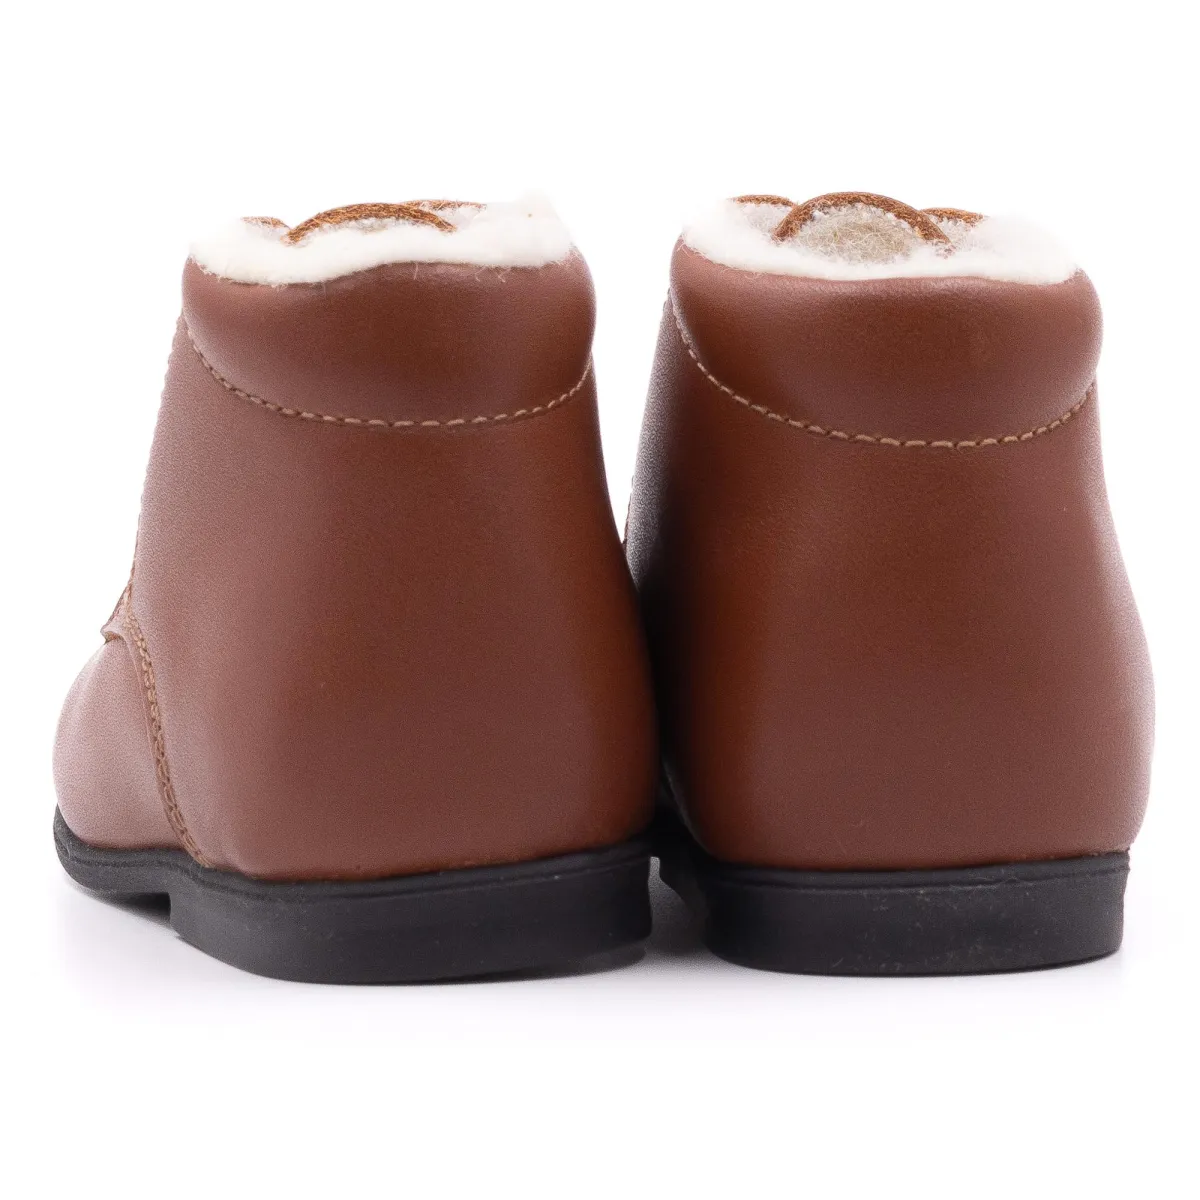 First-step shoes for babies, Boni Baby